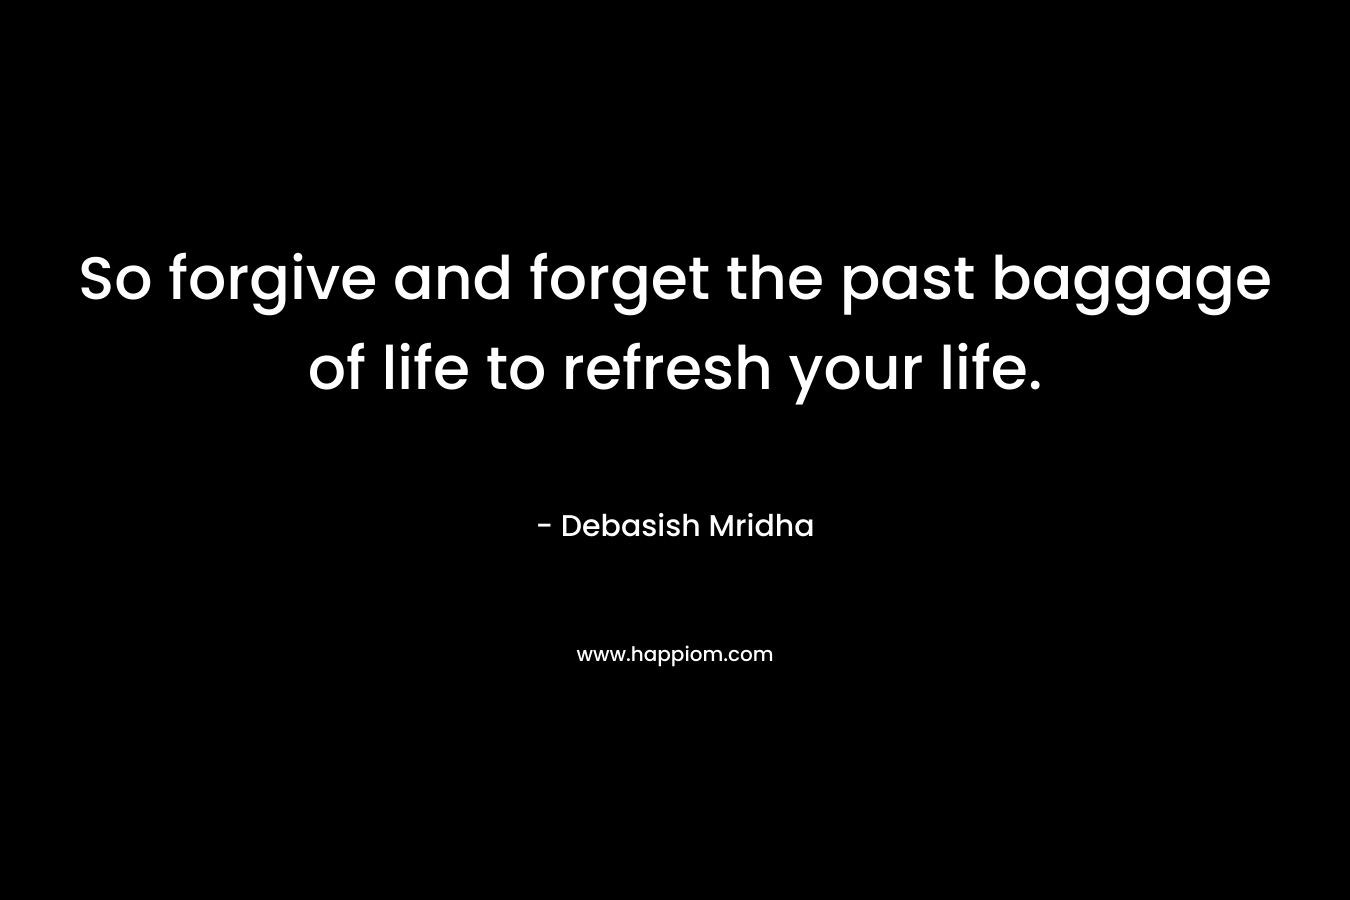 So forgive and forget the past baggage of life to refresh your life. – Debasish Mridha